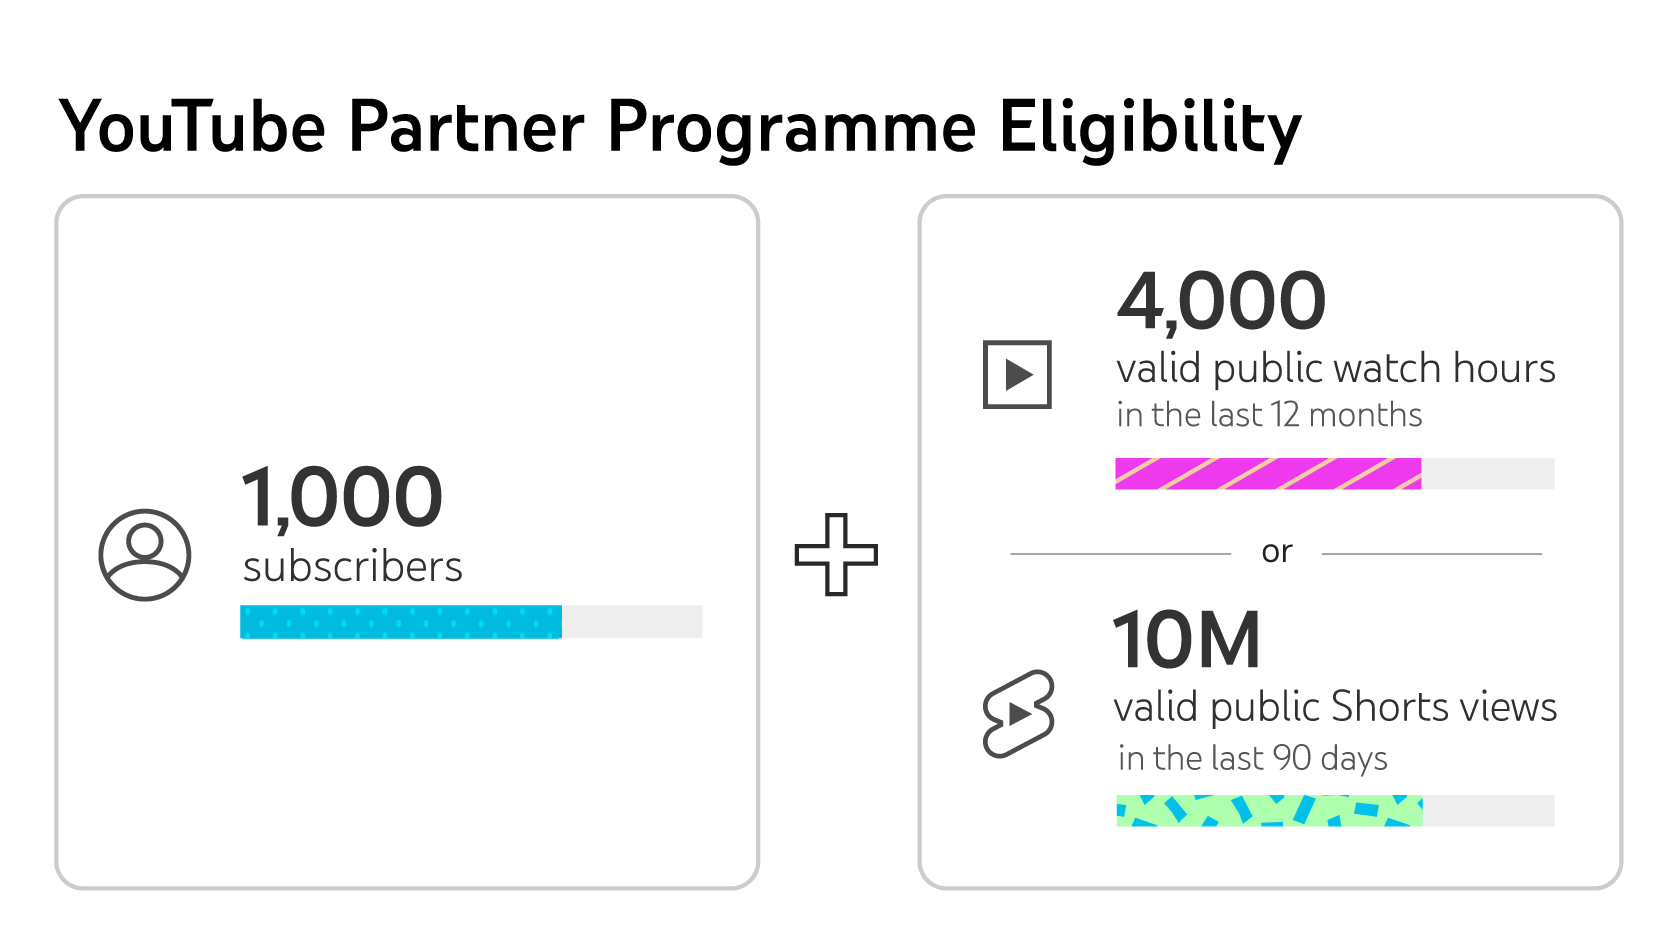 YouTube Partner Programme overview and eligibility - Android